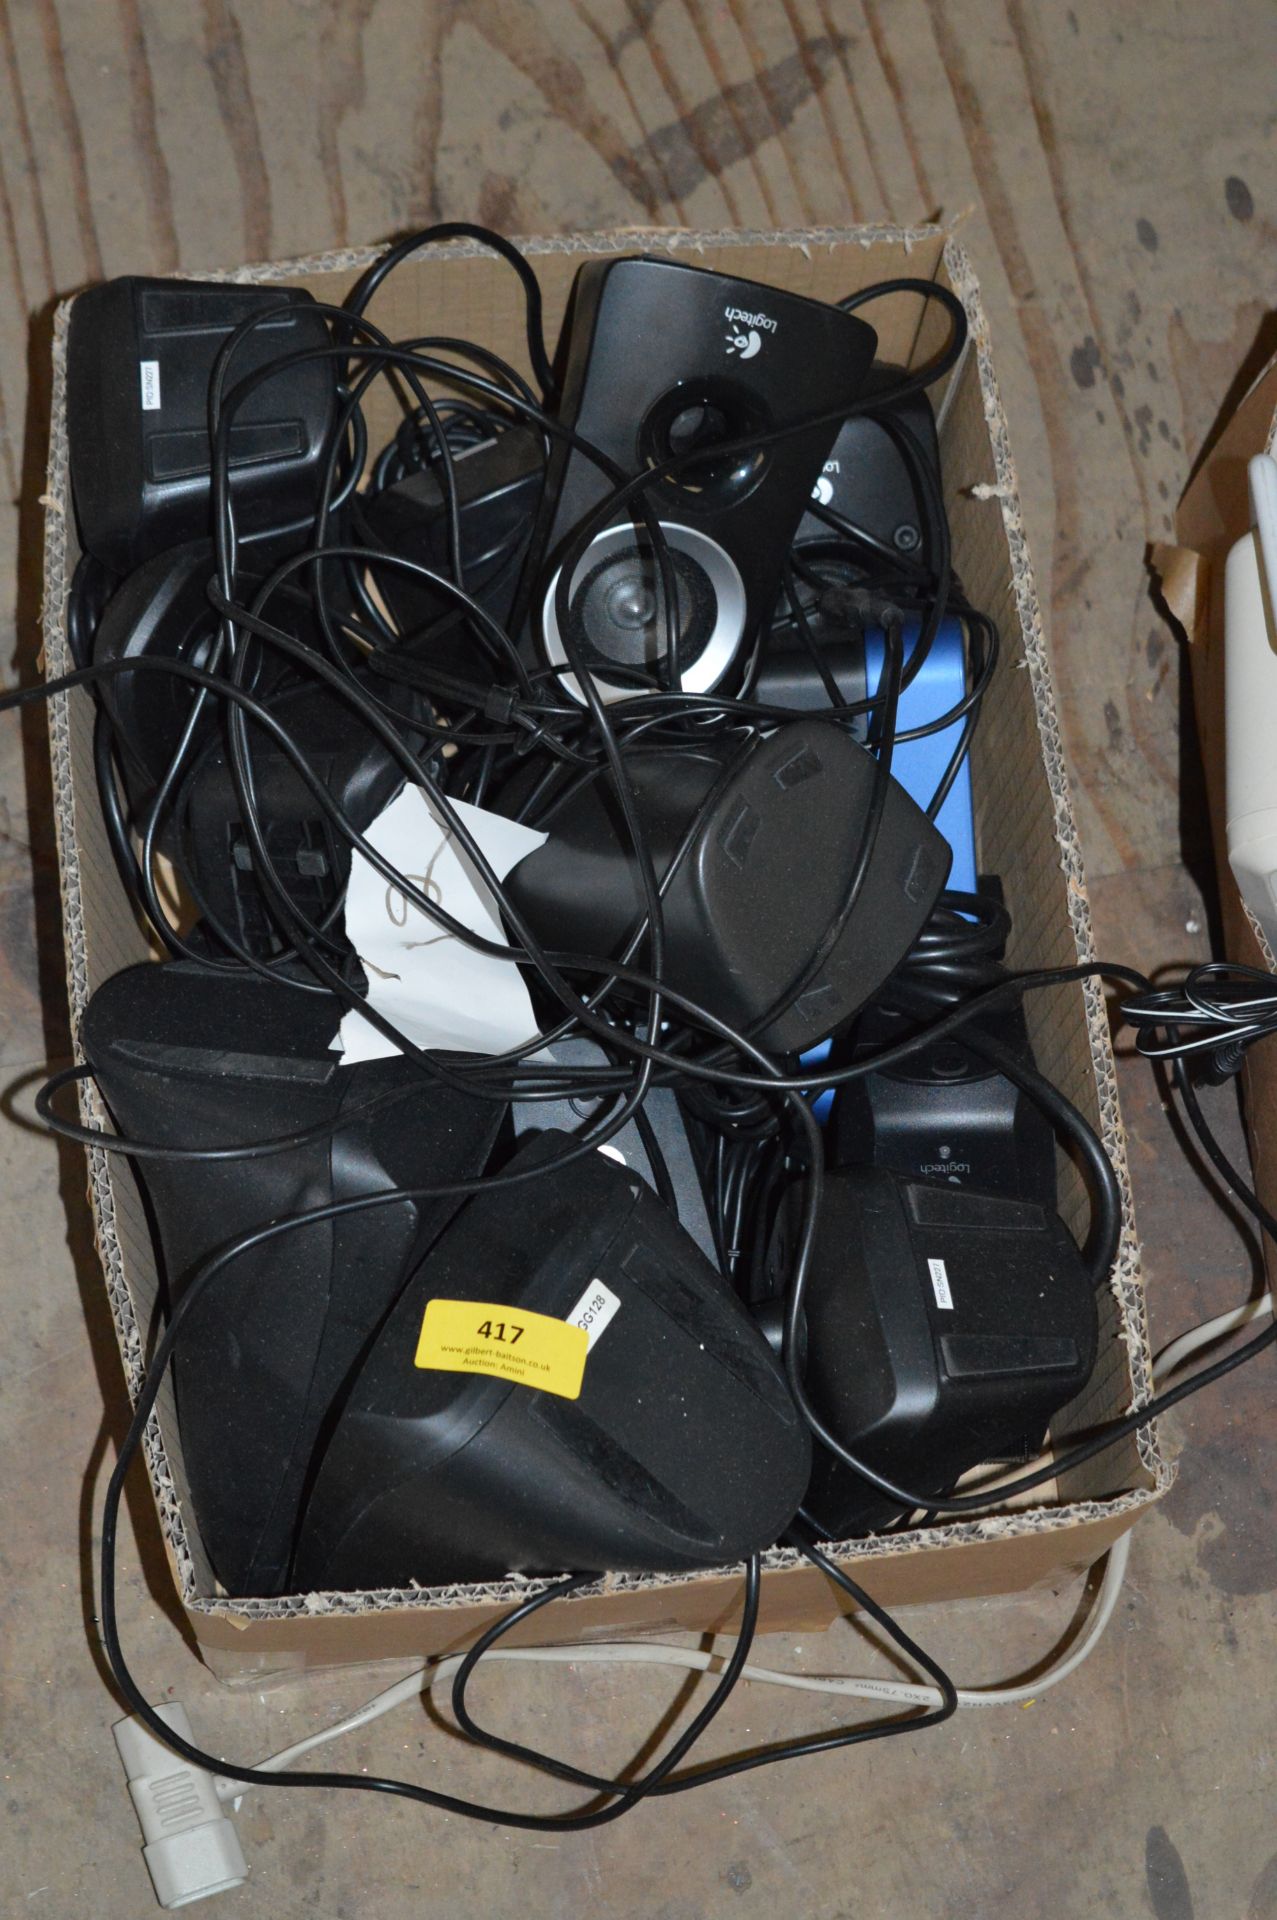 *Box Containing Computer Speakers